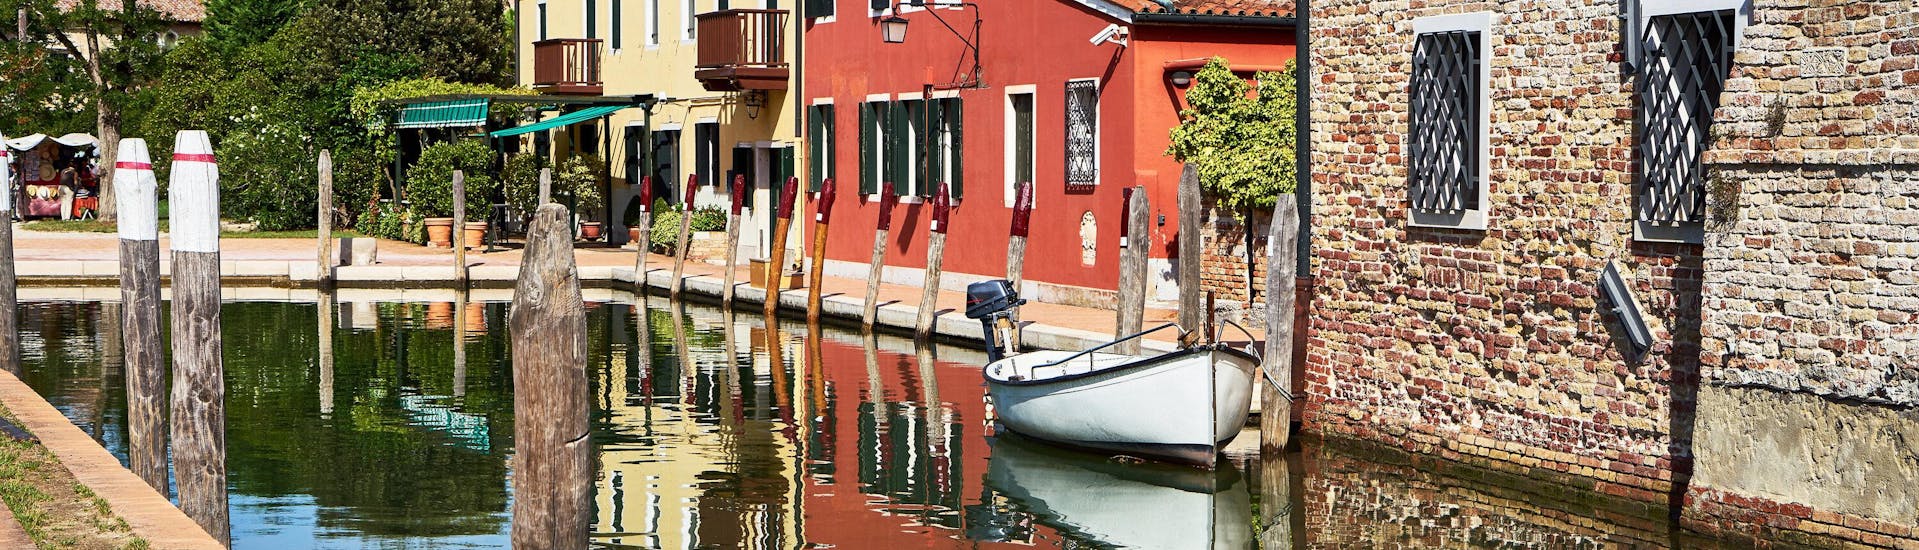 A boat in the canal during a boat trip to Torcello.